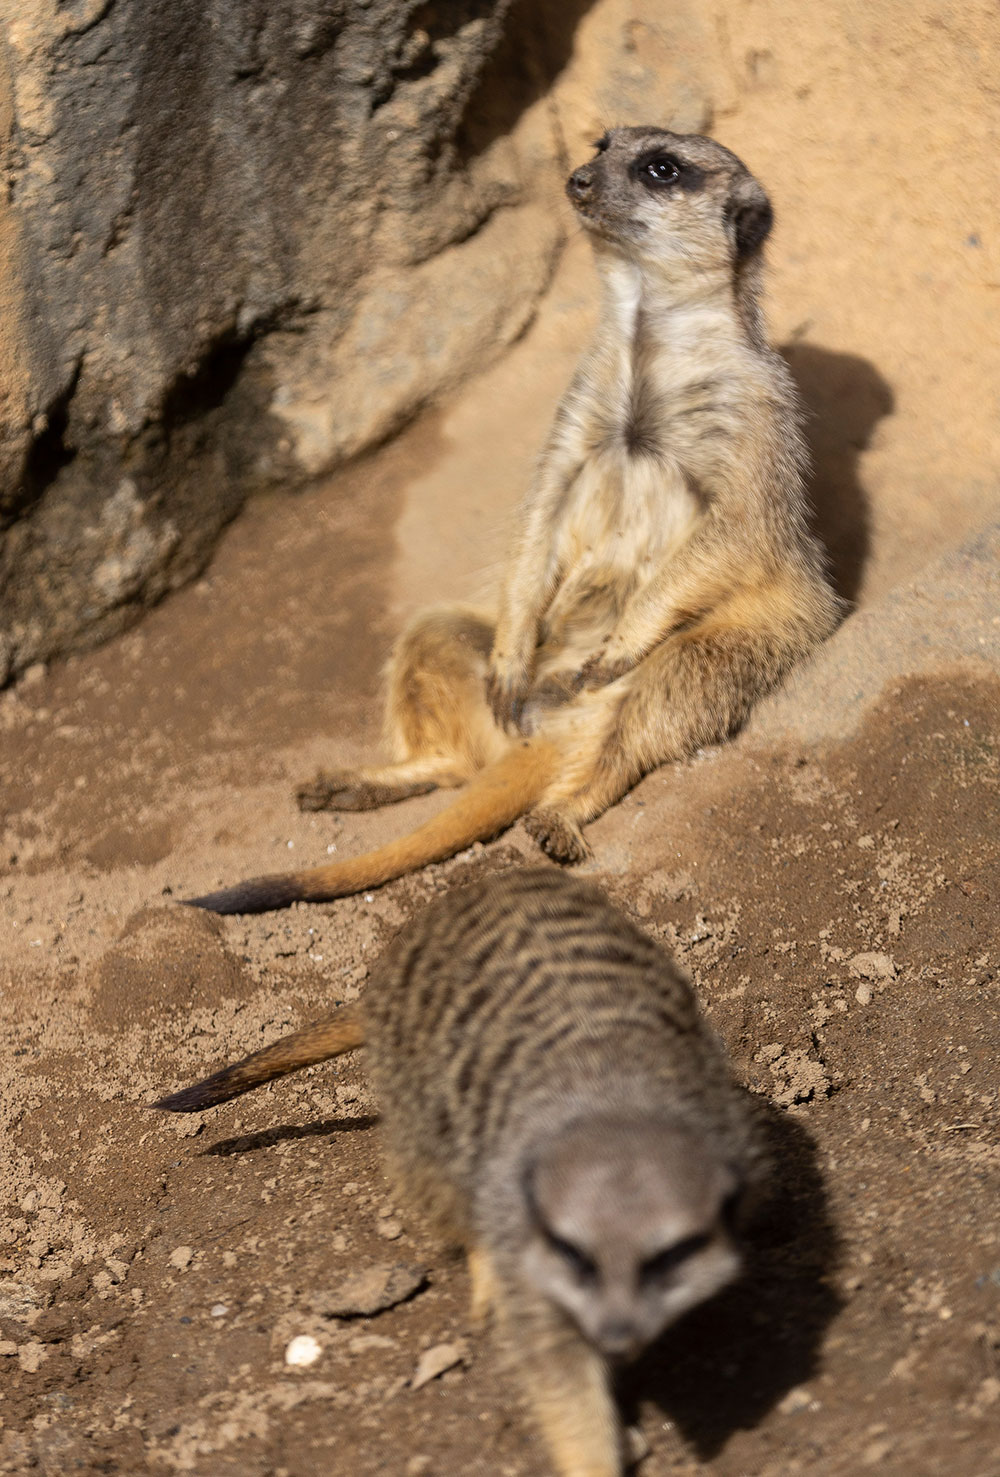 The Greensboro Science Center is home to a group (or mob) of meerkats.